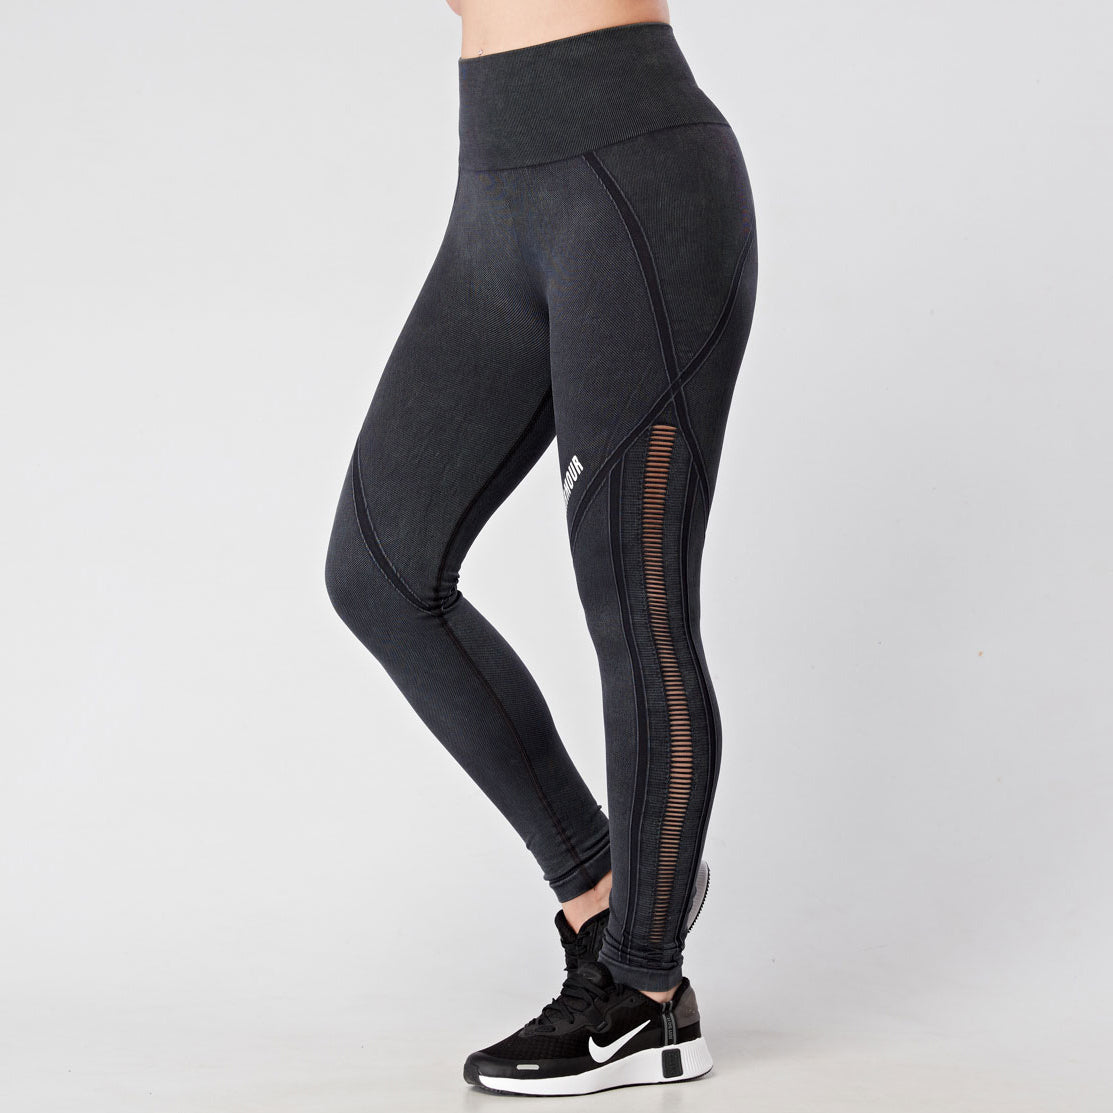 Women's Leggings SCANDALOUS Black-Red E-store repinpeace.com - Polish  manufacturer of sportswear for fitness, Crossfit, gym, running. Quick  delivery and easy return and exchange